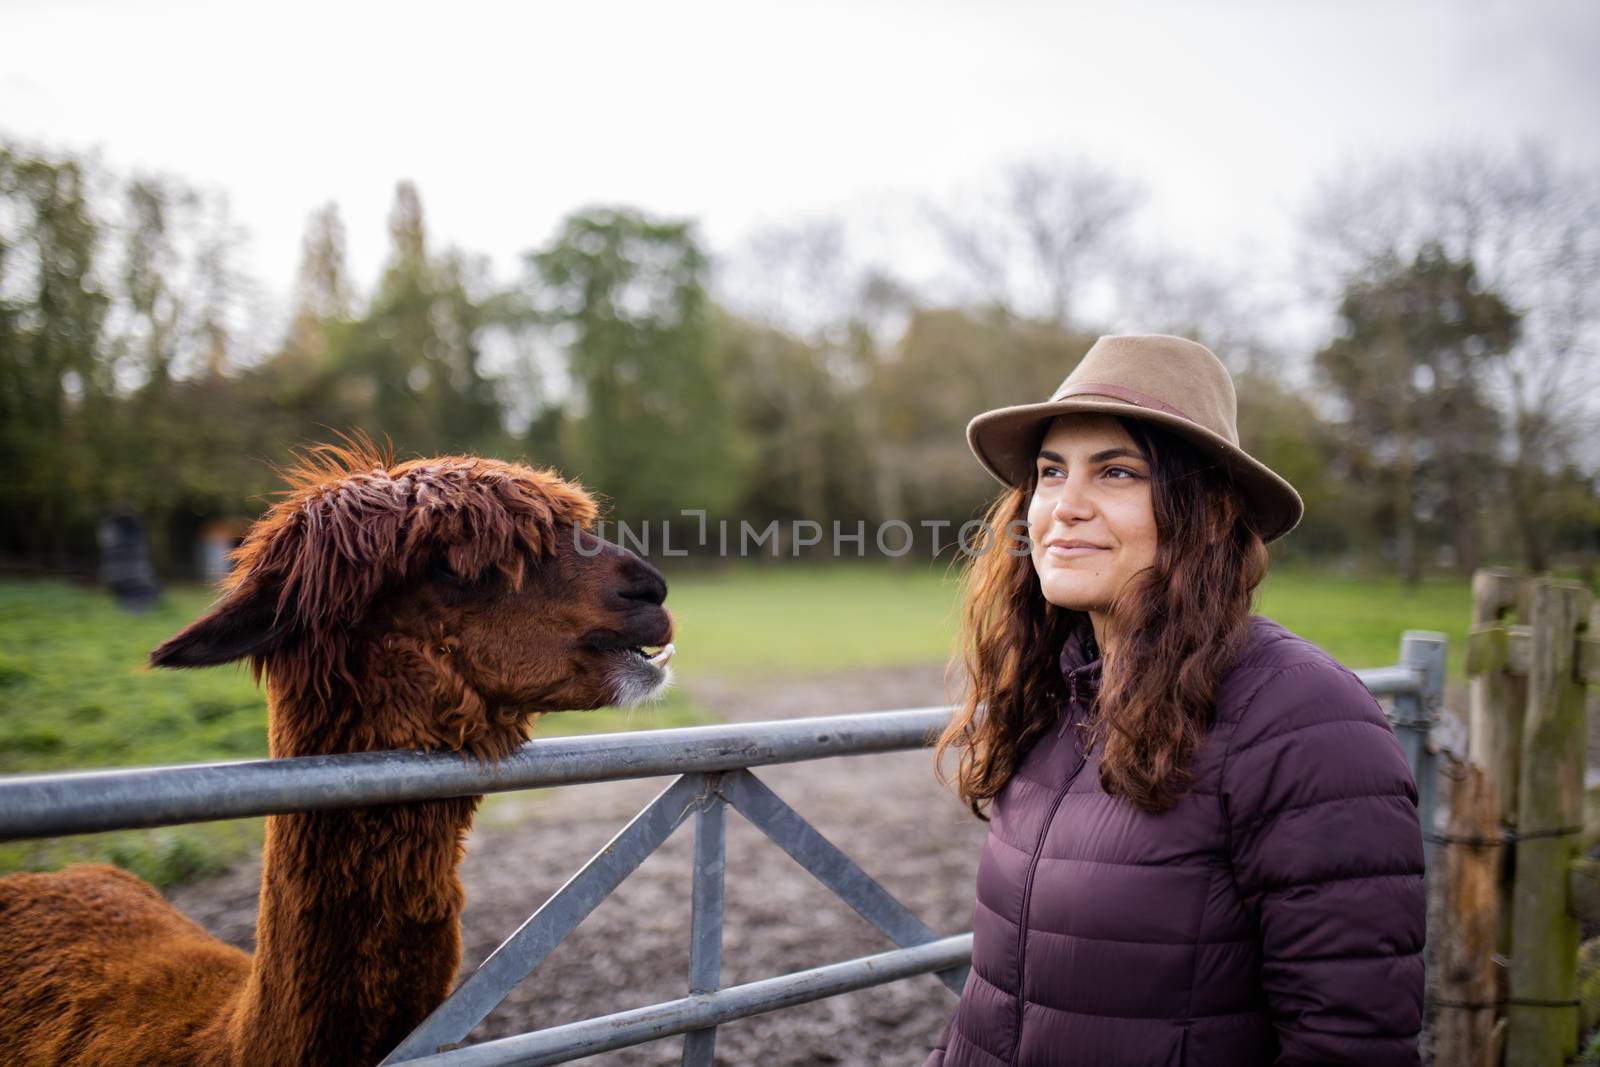 Smiling woman wearing a hat standing next to a brown alpaca behind a fence by Kanelbulle